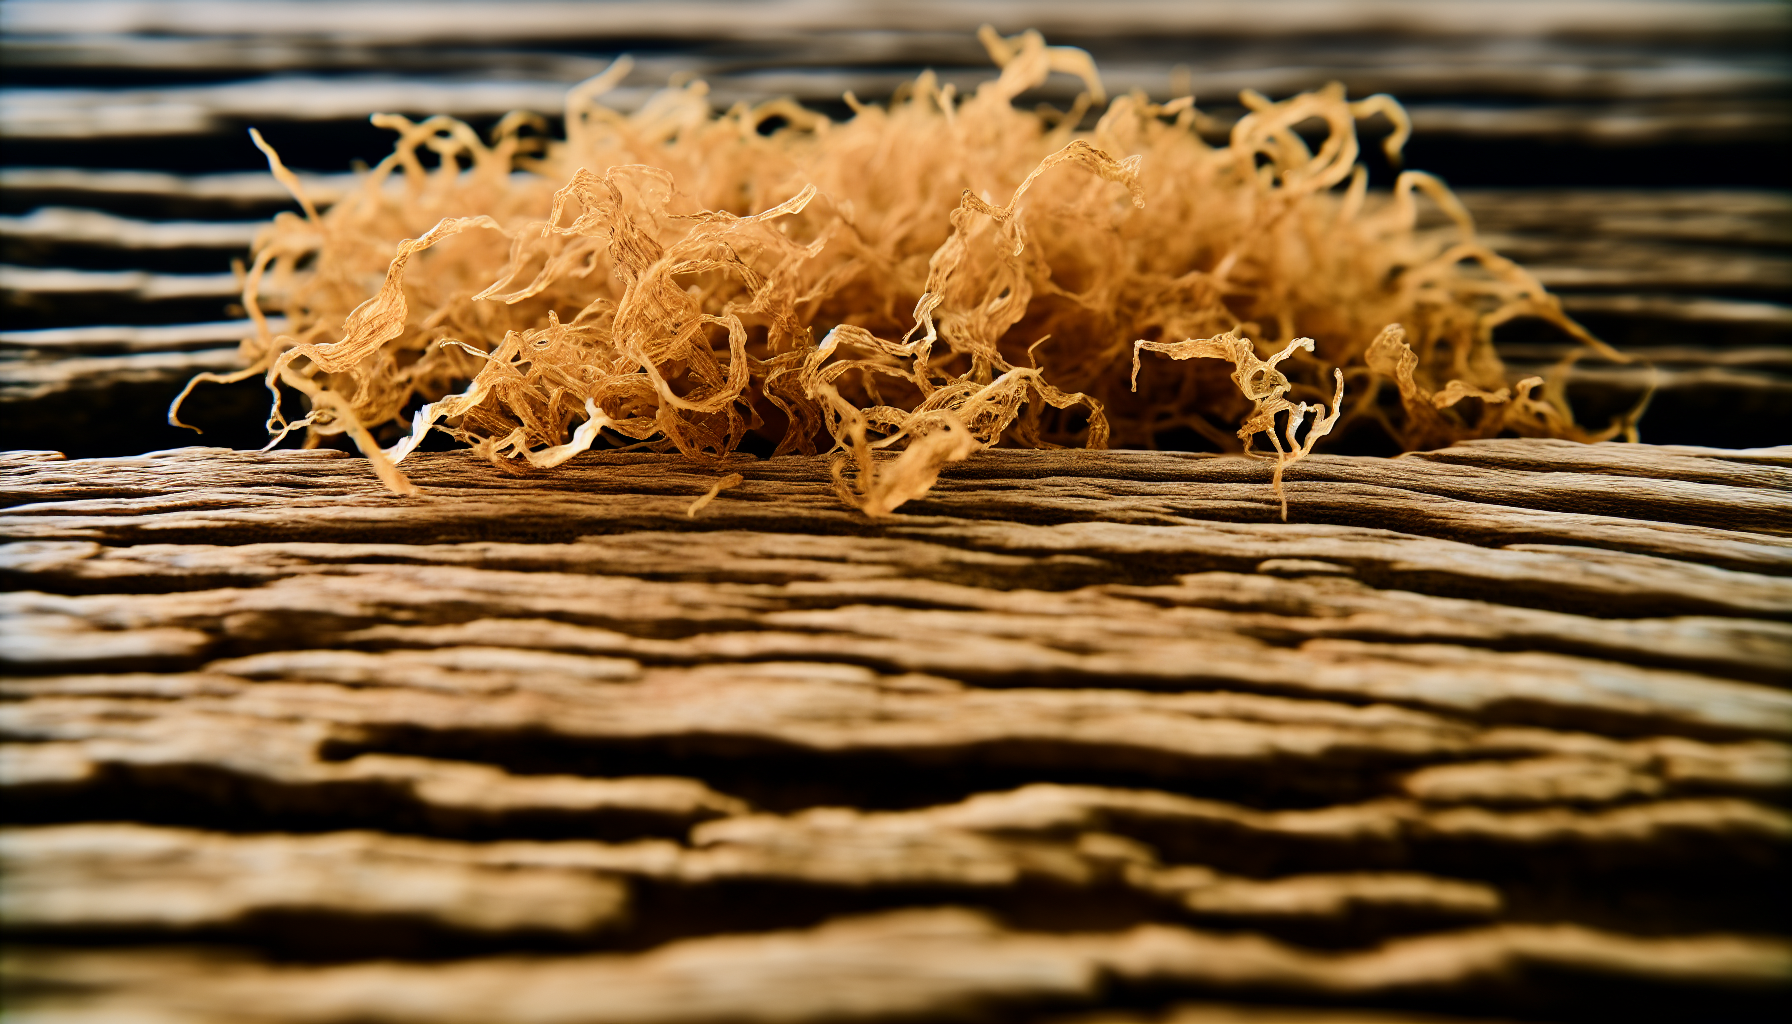 Dried sea moss on a wooden surface